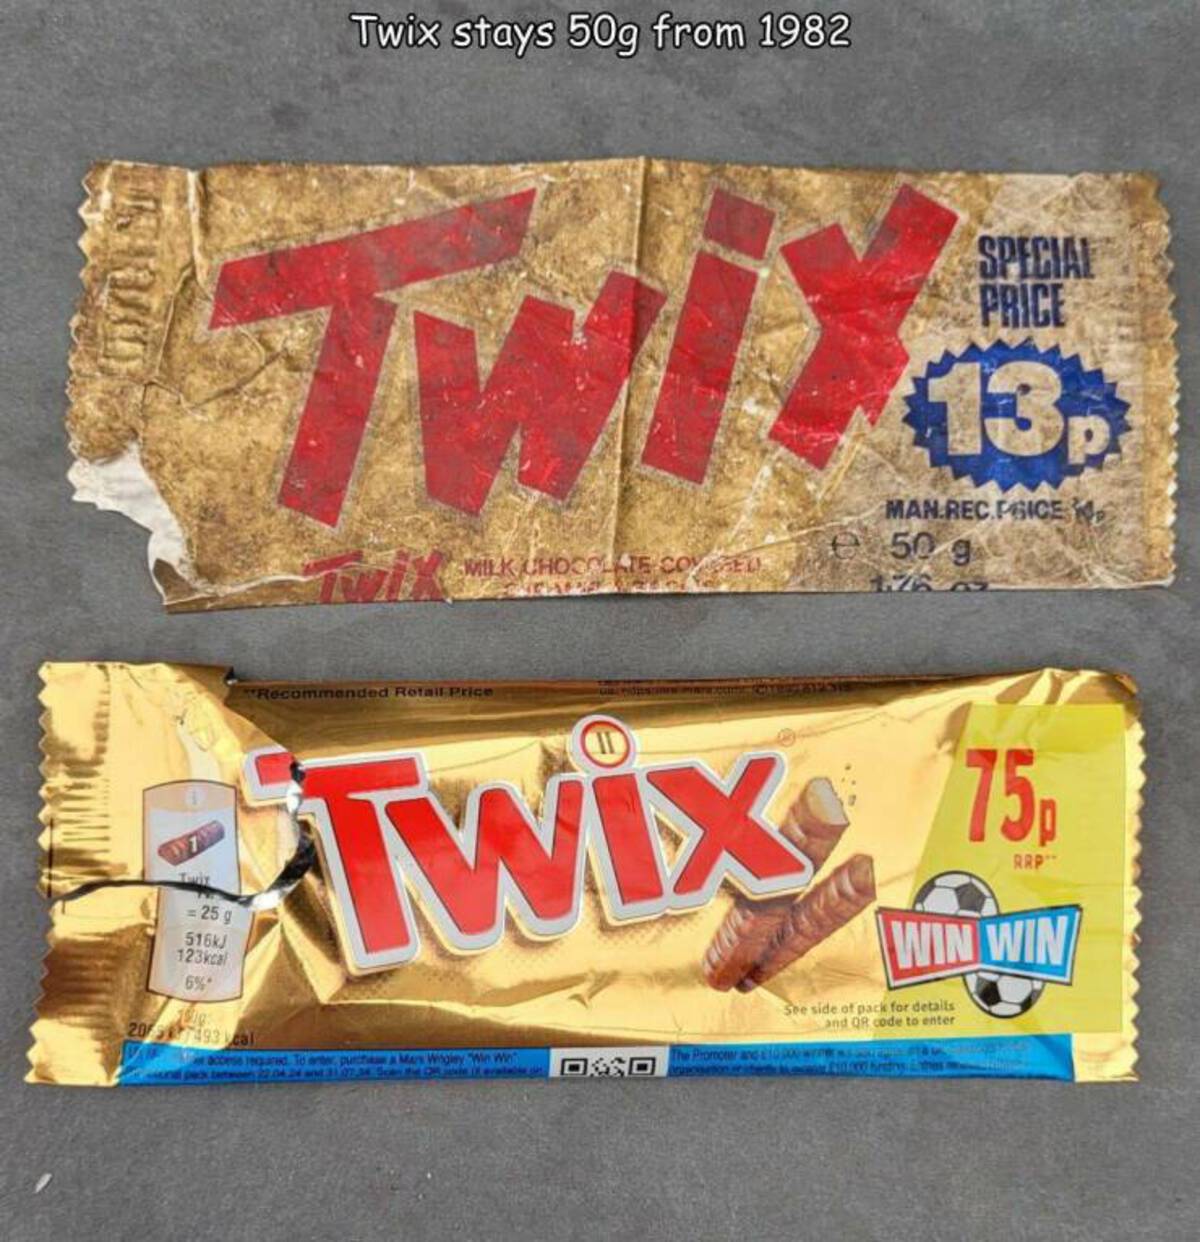 snack - Twix stays 50g from 1982 Twit Twit 25 g J cal 6% 1910 20 493 cal Milk Chocolate Comed Recommended Retail Price Special Price Man Rec Pgice 50 g 75 Twix 15 Rapt Win Win See side of pack for details access regard. To enter, puta Mars Wingley "Win Wi